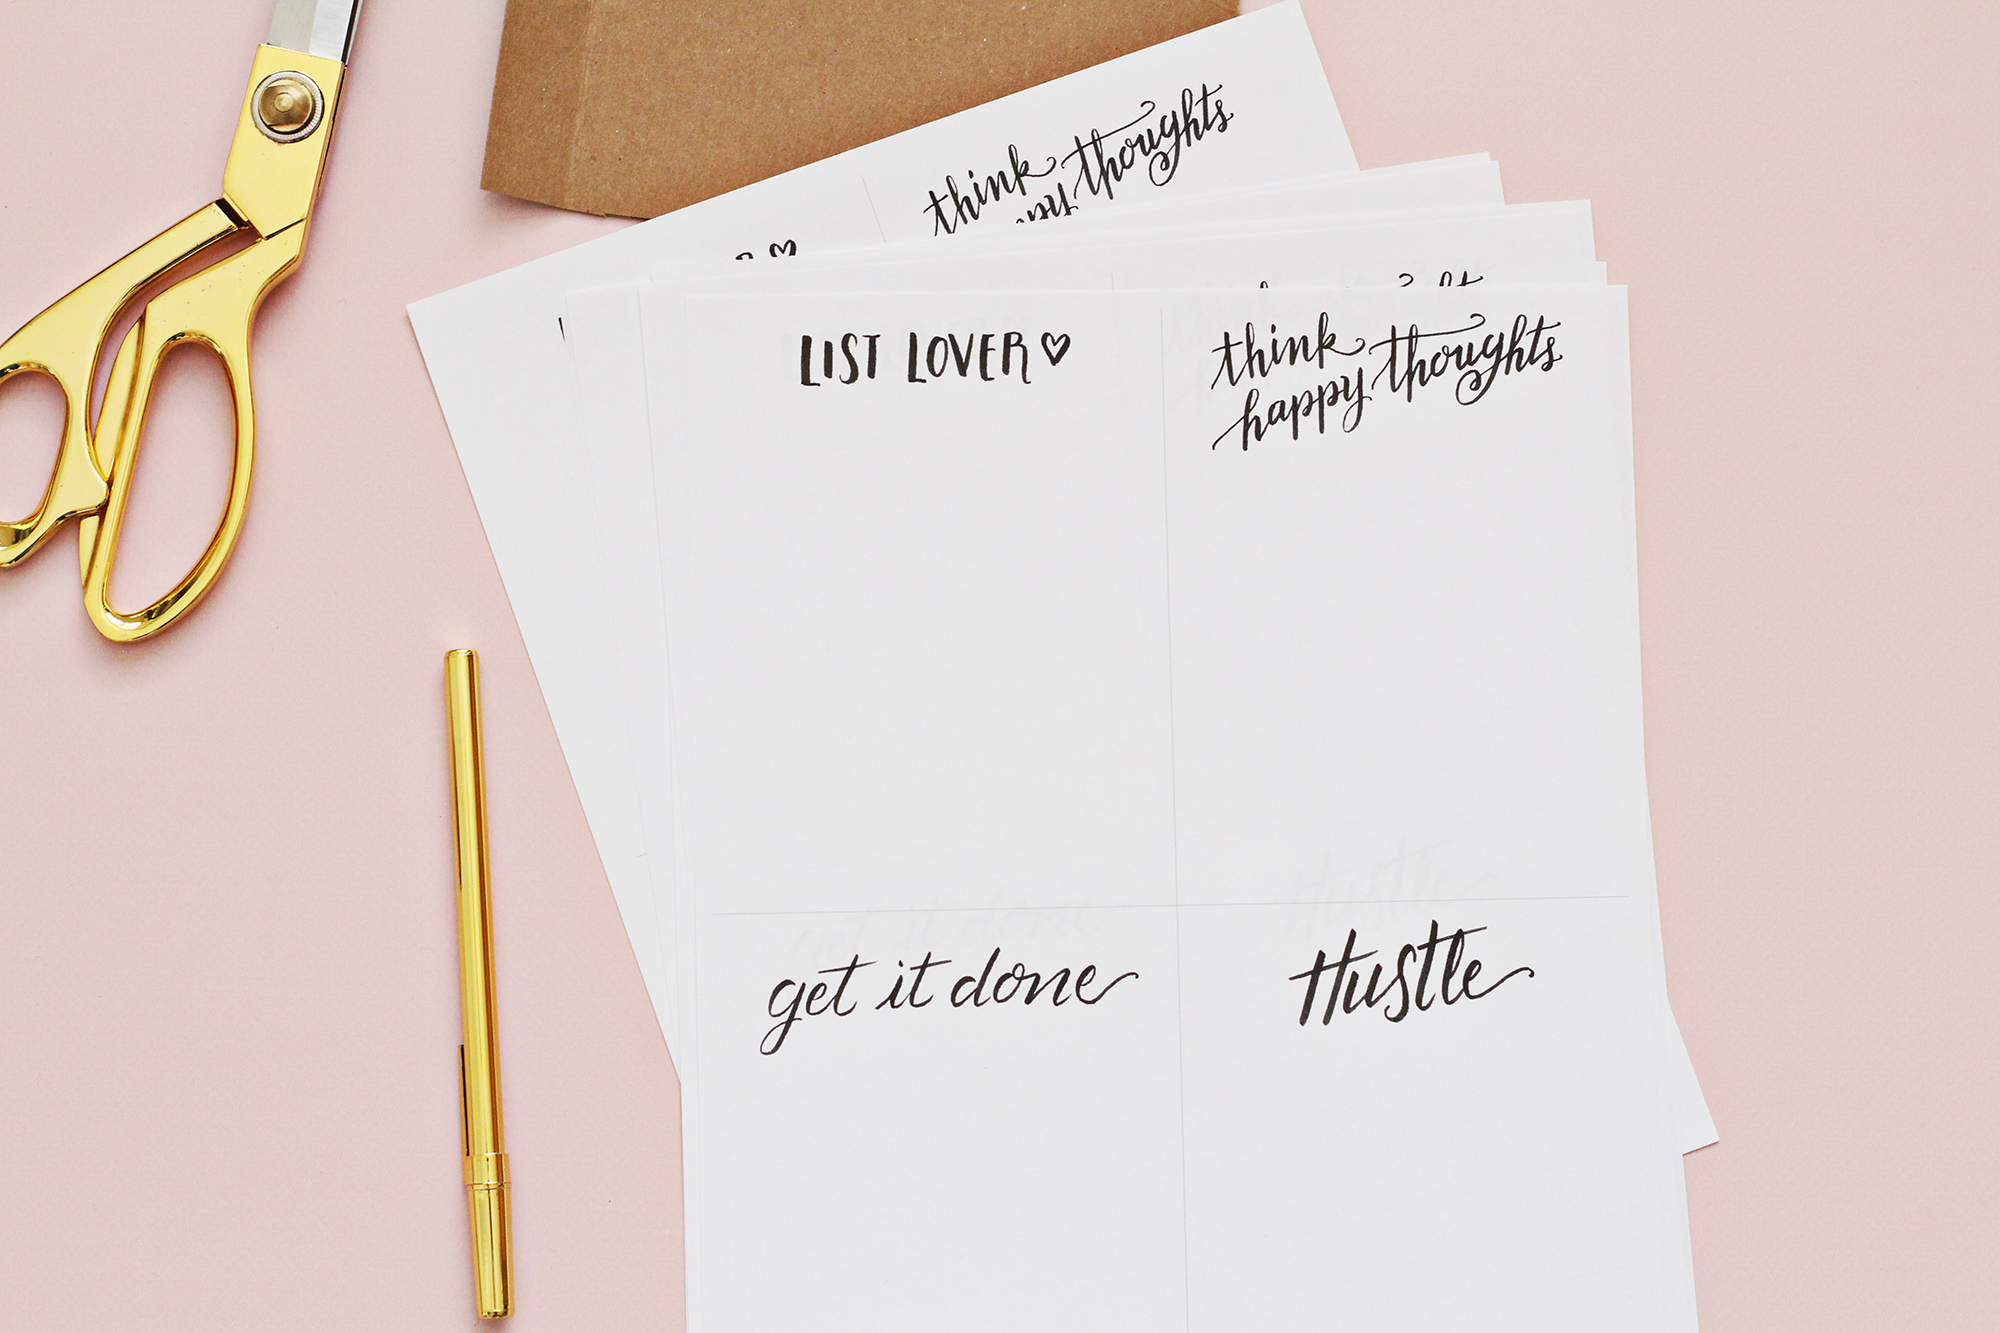 Use our free download to print pages and make a DIY notepad gift